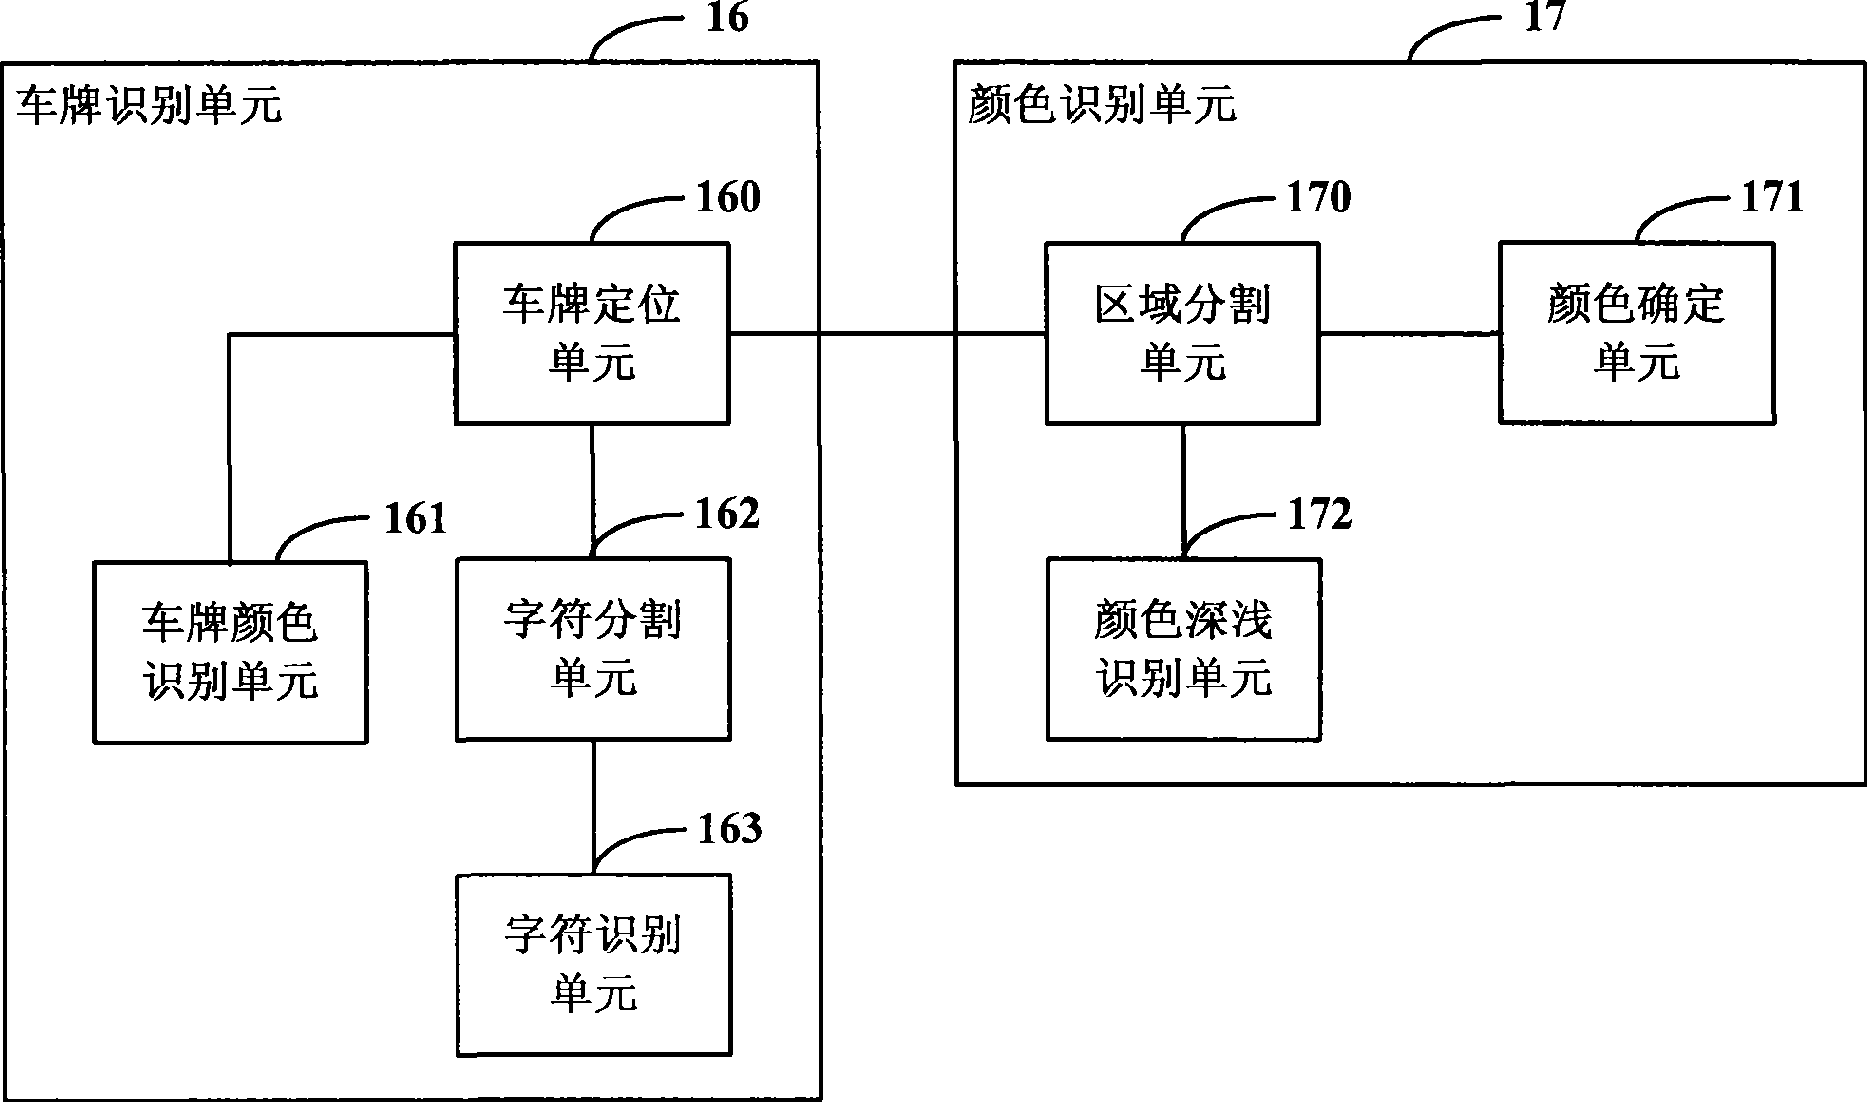 Image acquisition and treatment apparatus and method, and vehicle monitoring and recording system